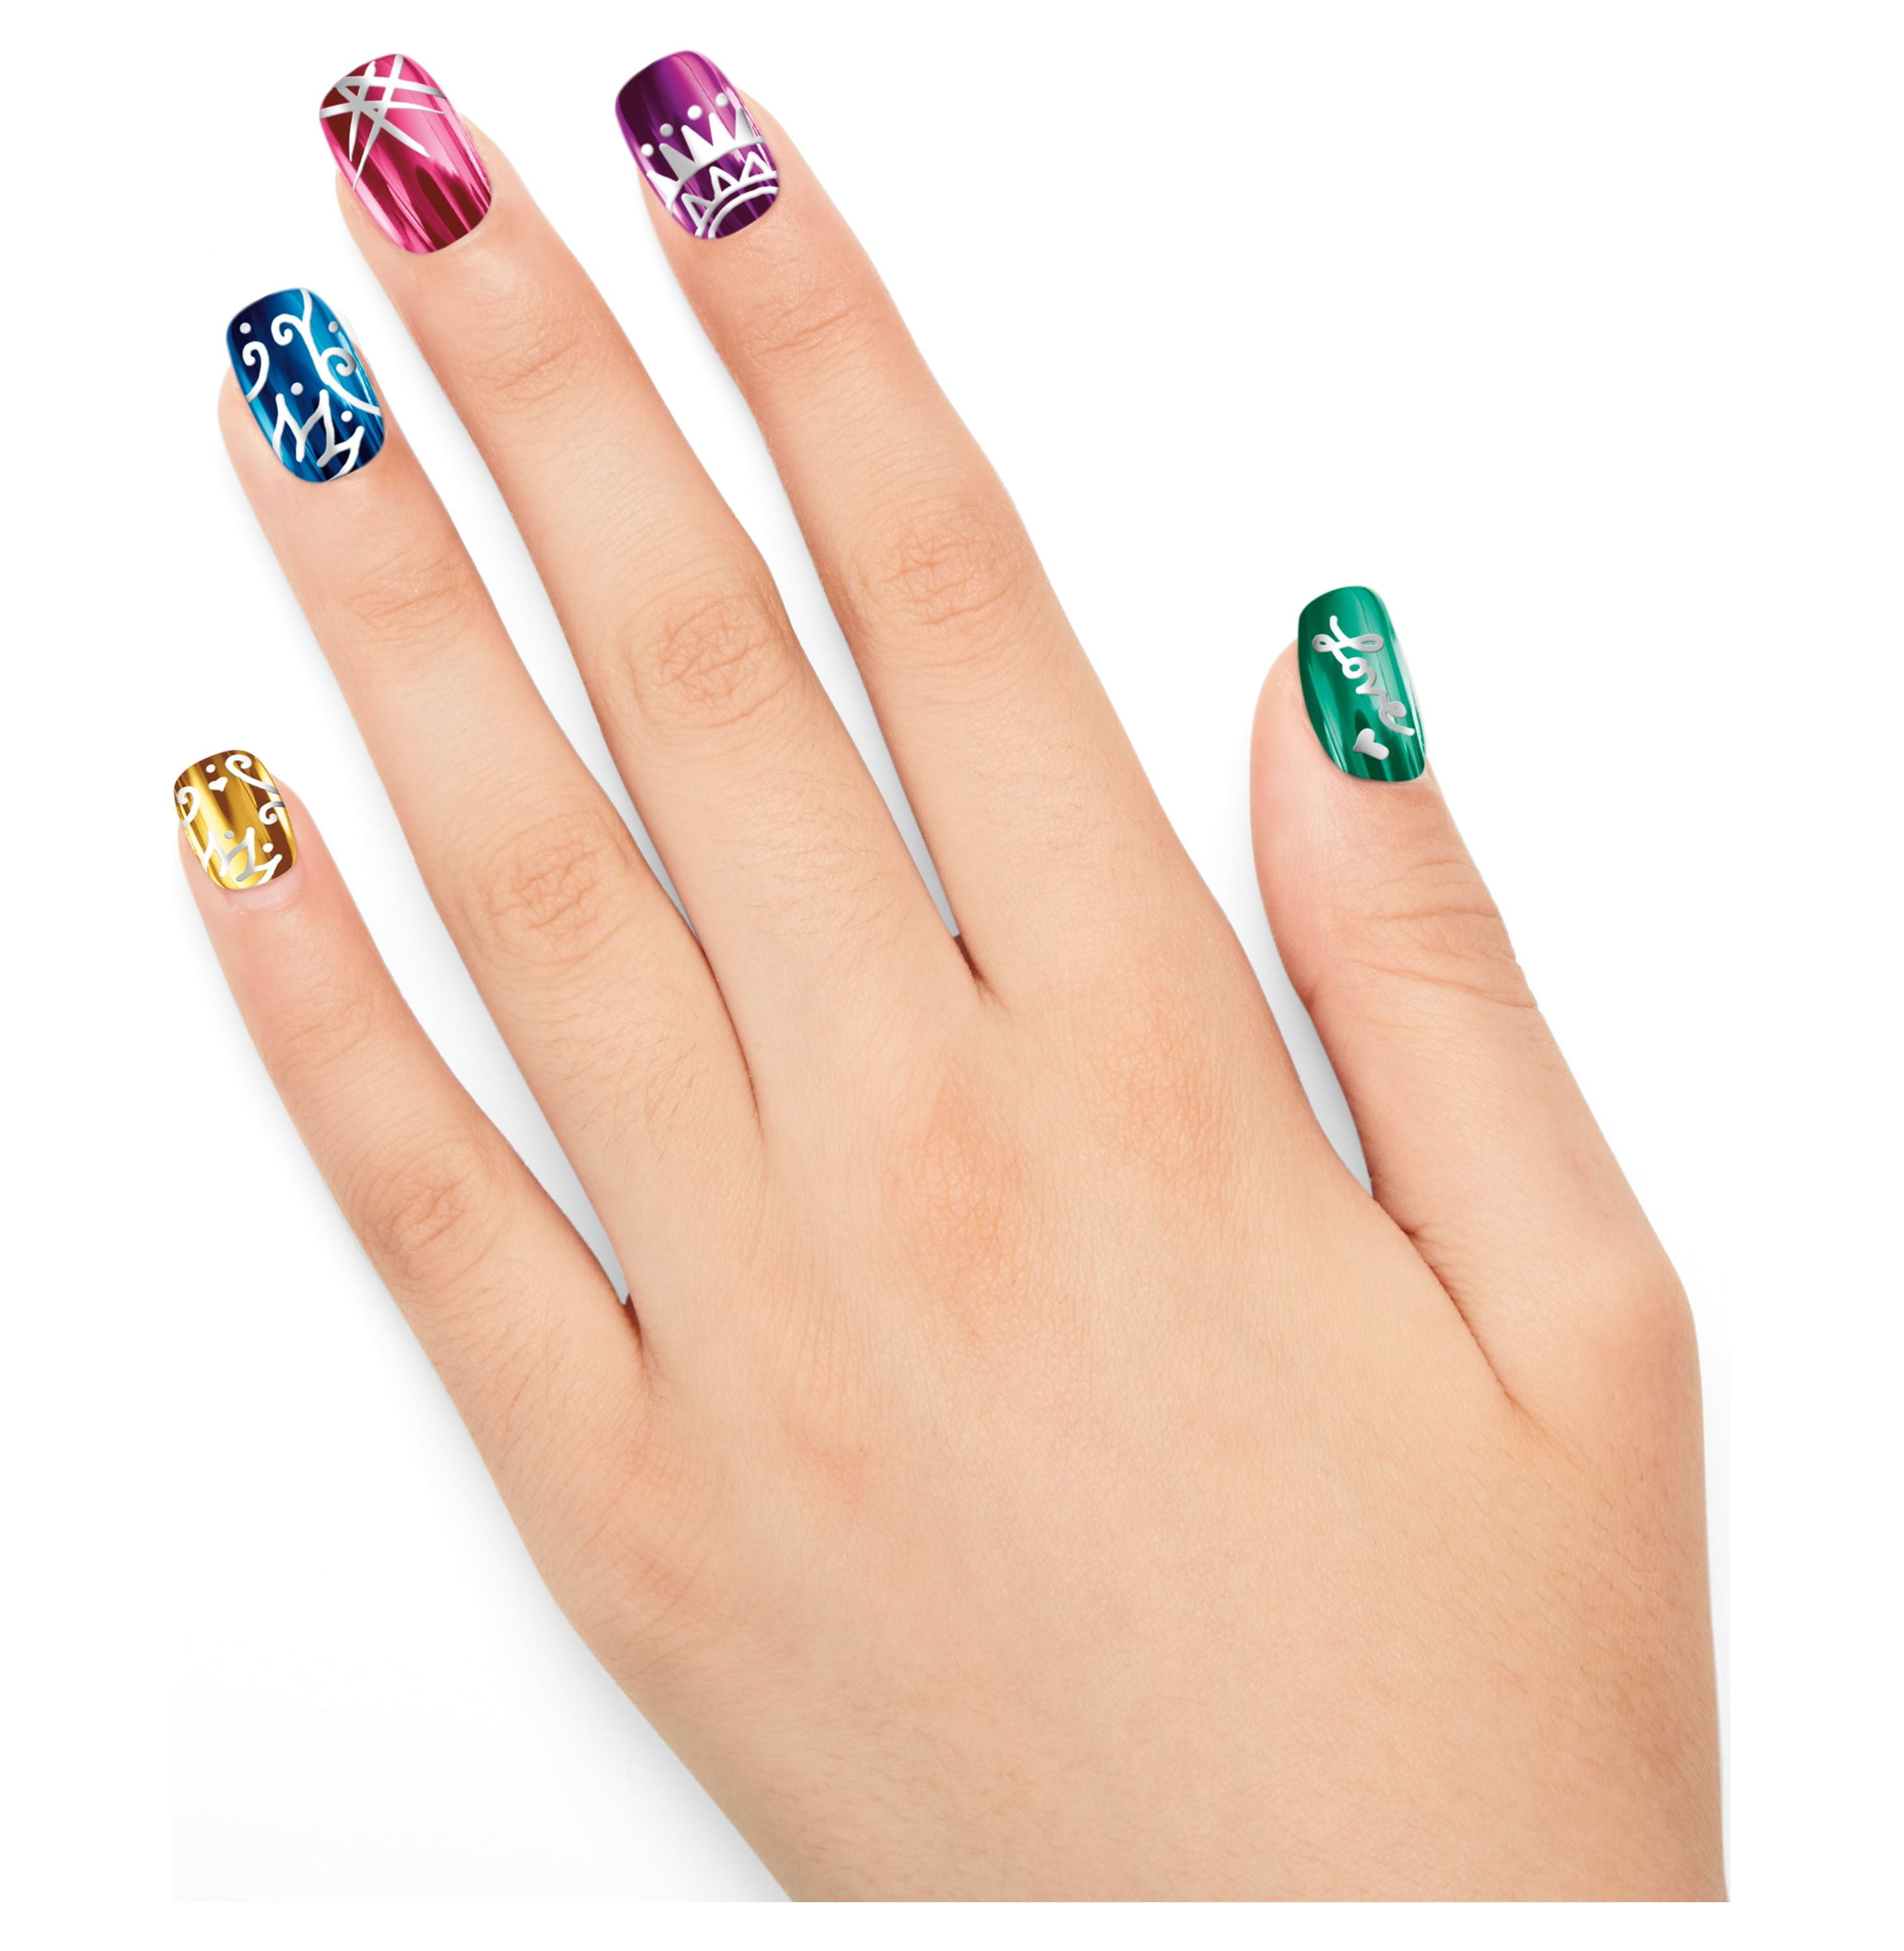 Show Your Pride With Rainbow Nail Art - Behindthechair.com